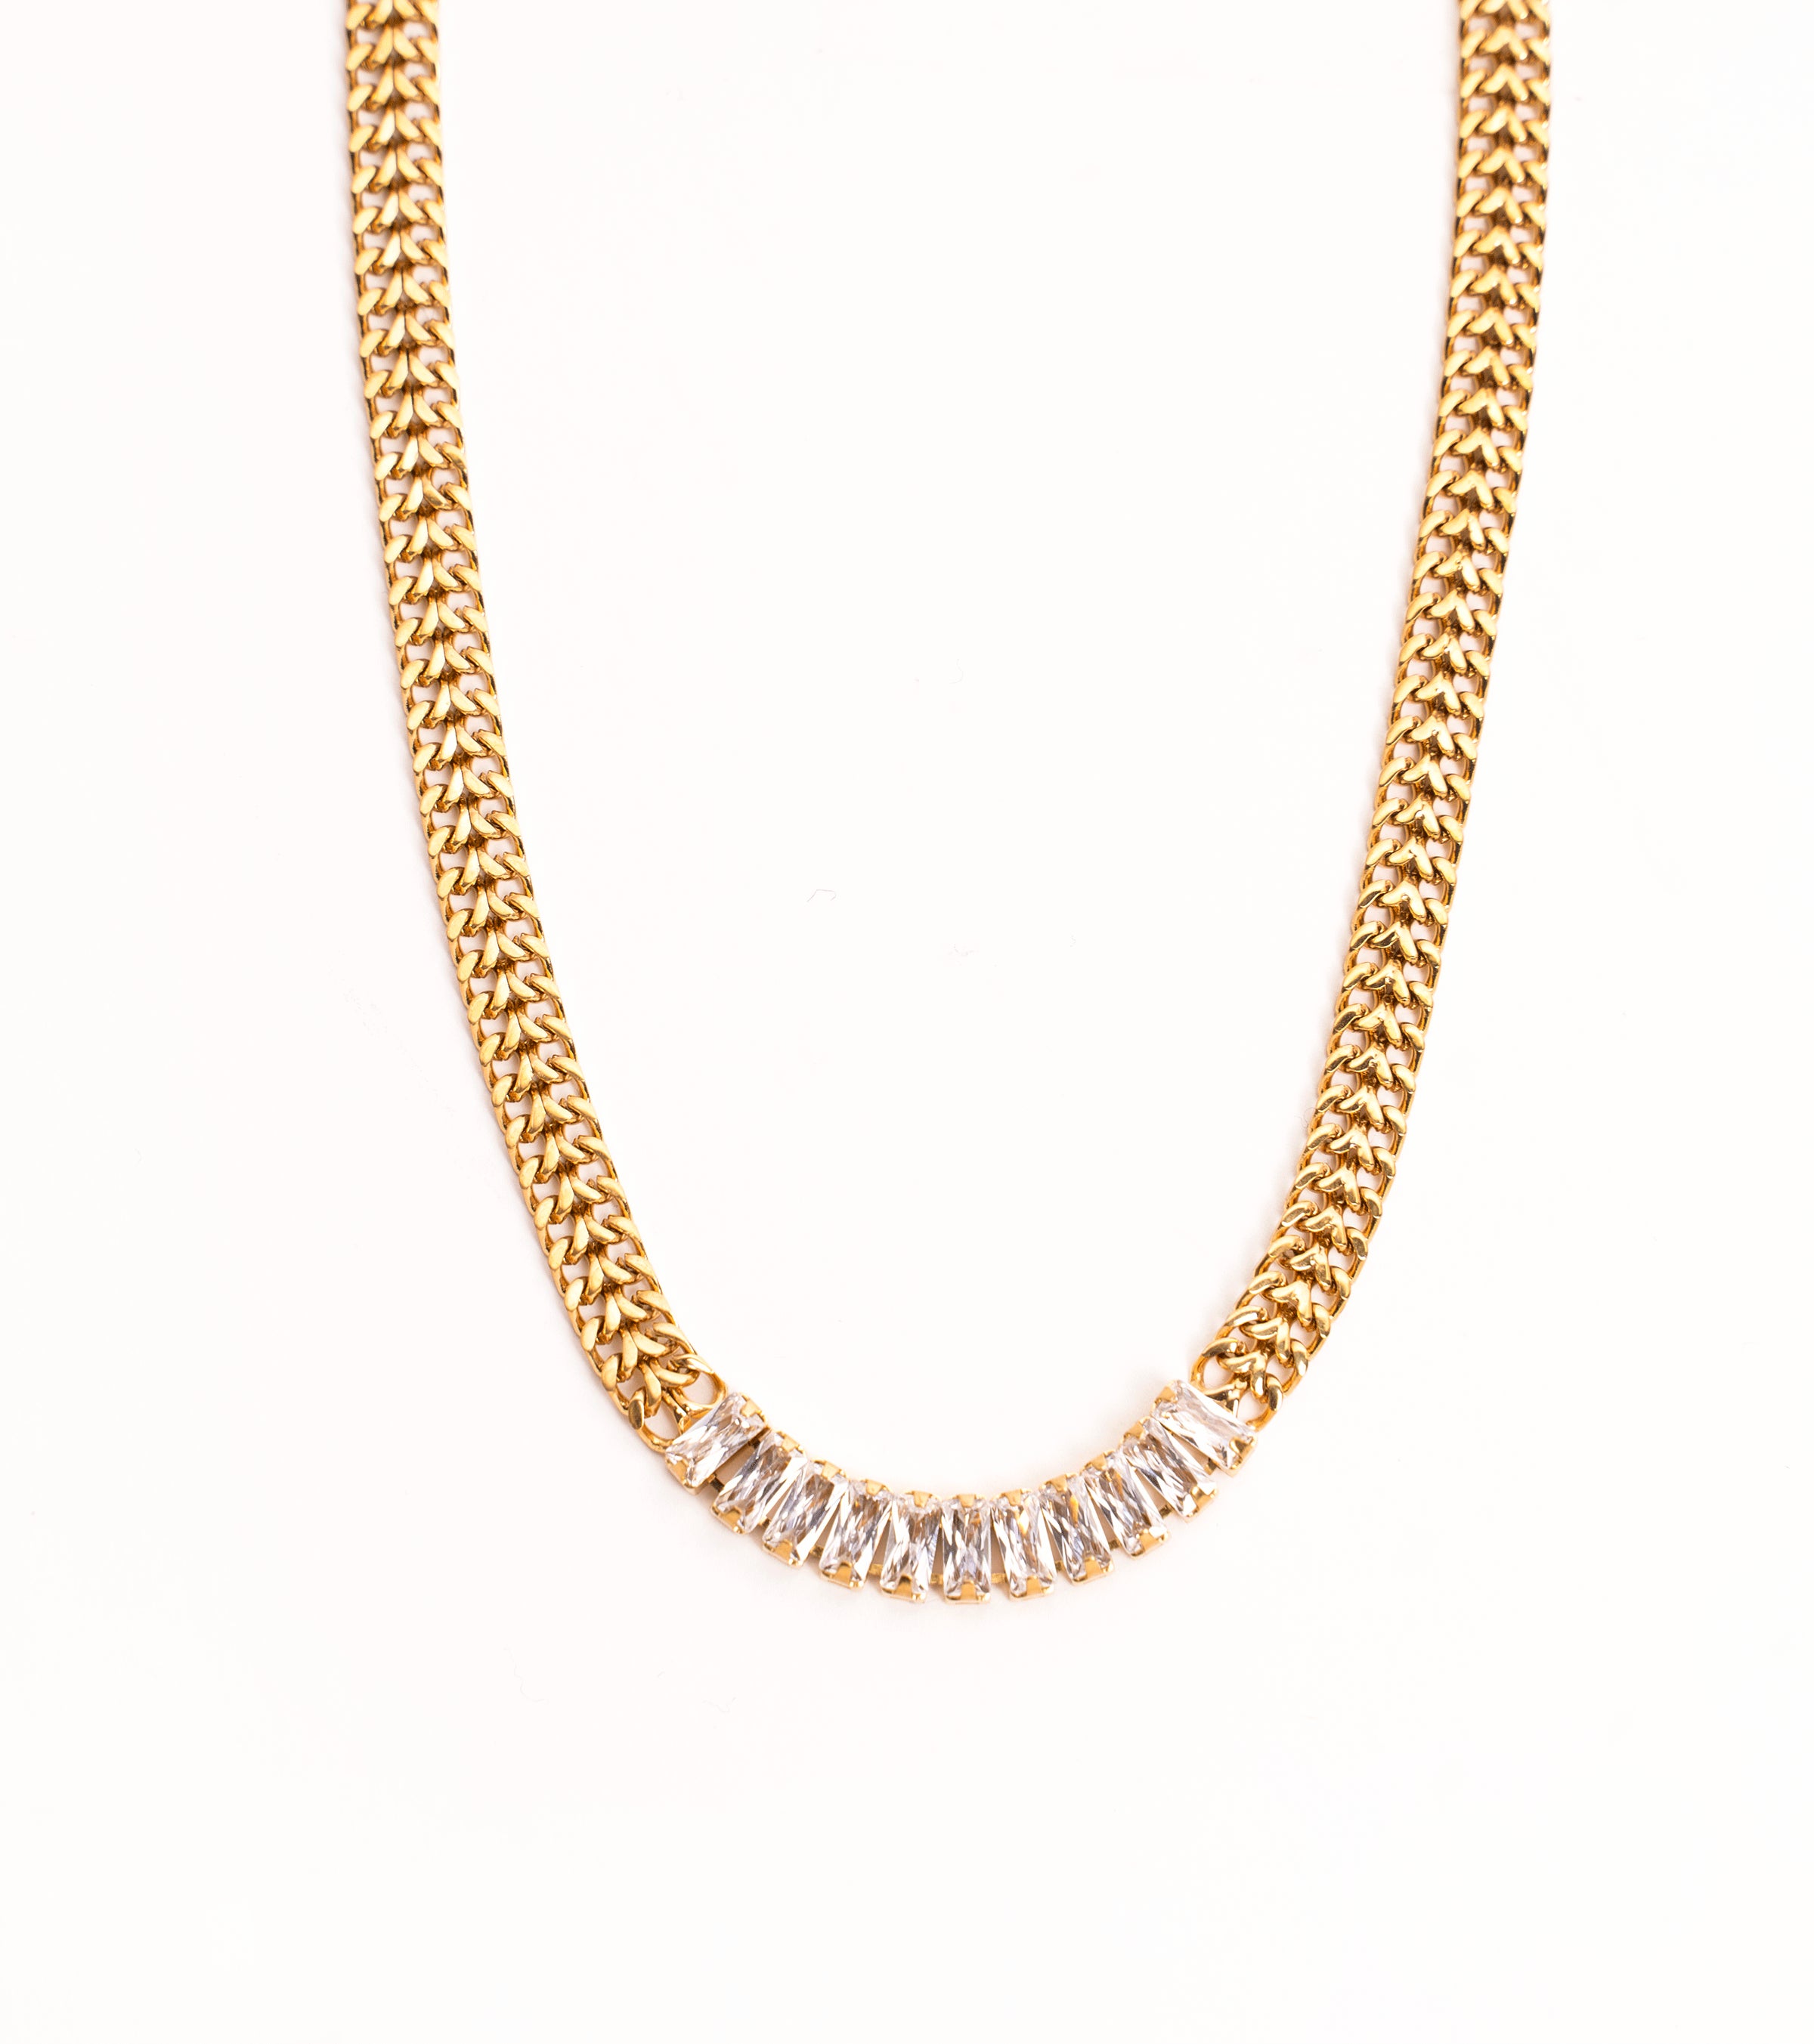 18K Gold Plated Marissa Cuban Chain Necklace - Hypoallergenic & Waterproof Stainless Steel with Baguette Stones Bijou Her